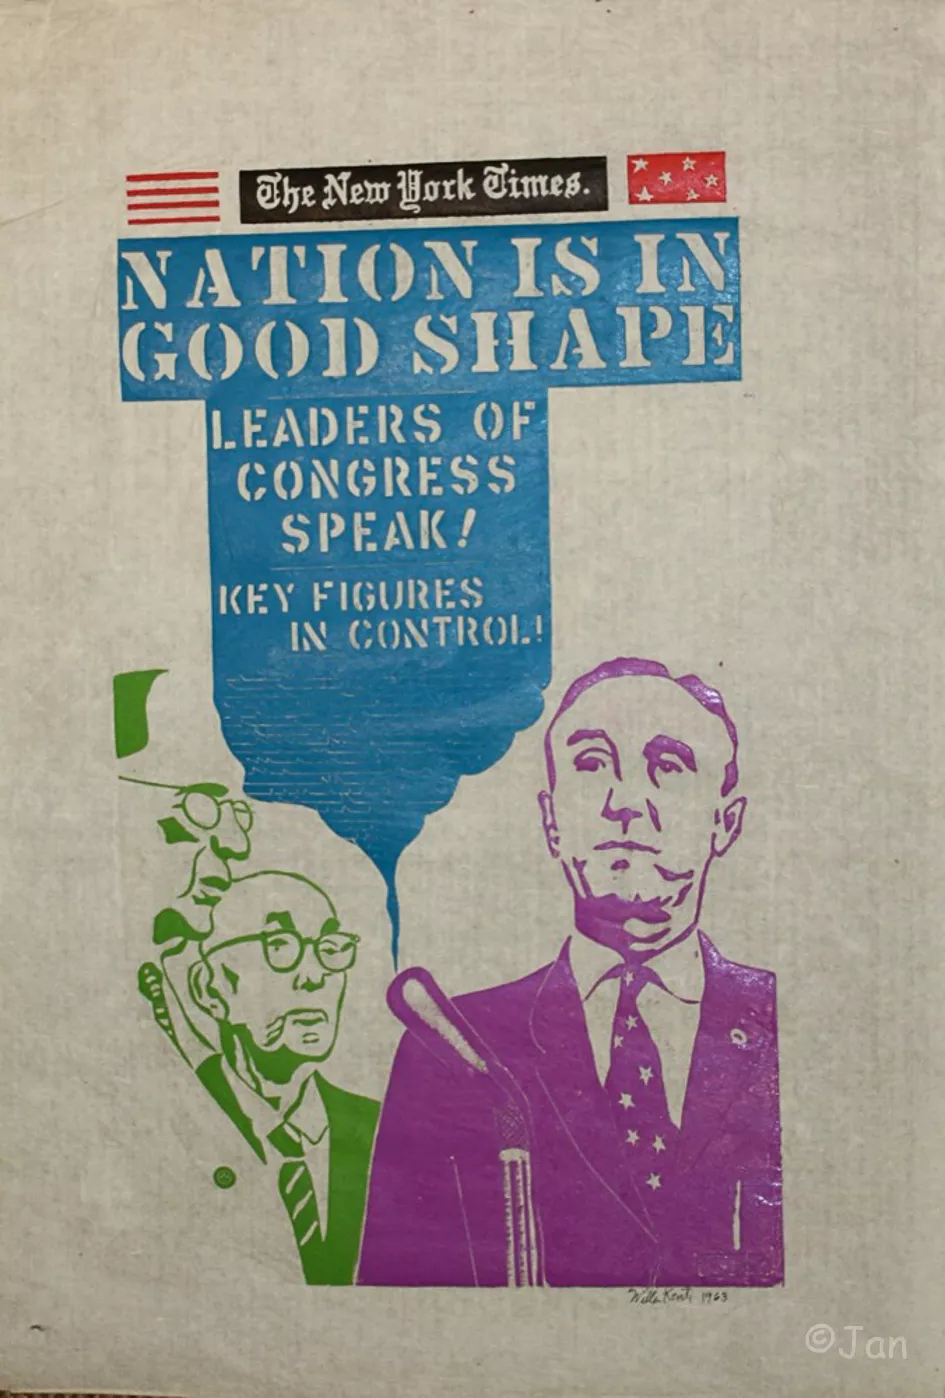 nation-is-in-good-shape (1963)william kent